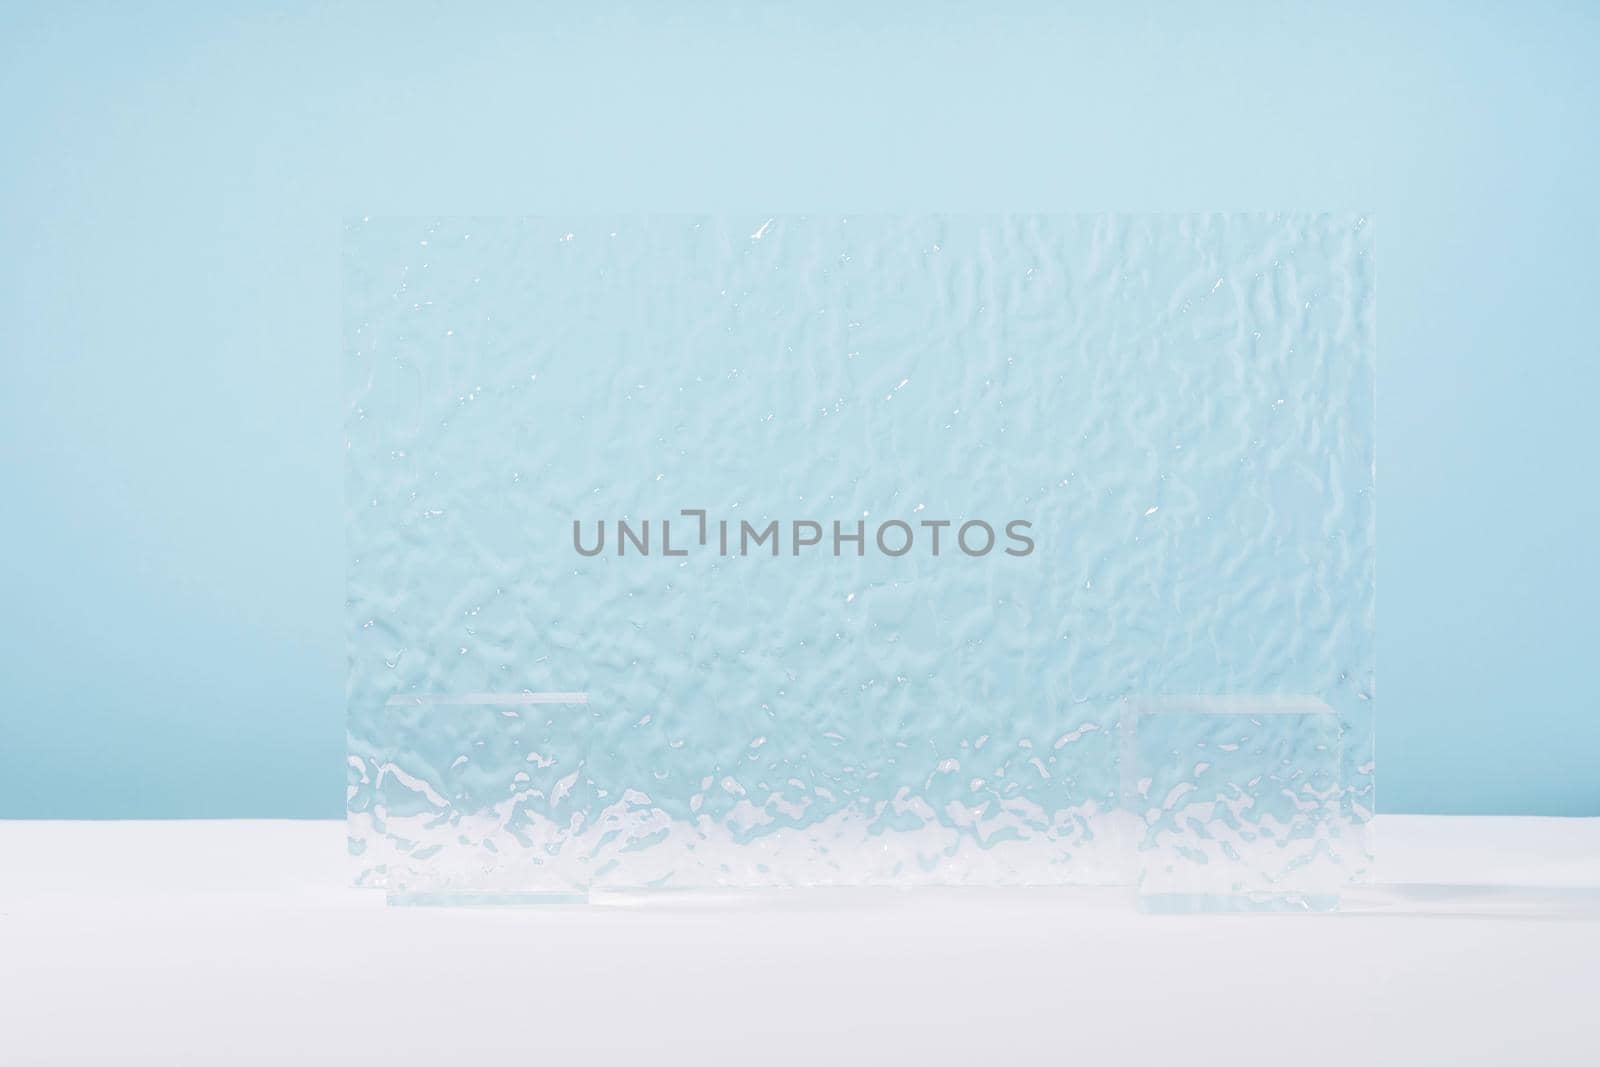 Acrylic ribbed plate, background for cosmetic product packaging on blue backdrop. Showcase for jewellery presentation, display for perfume advertising, cosmetics stand branding scene mockup by photolime